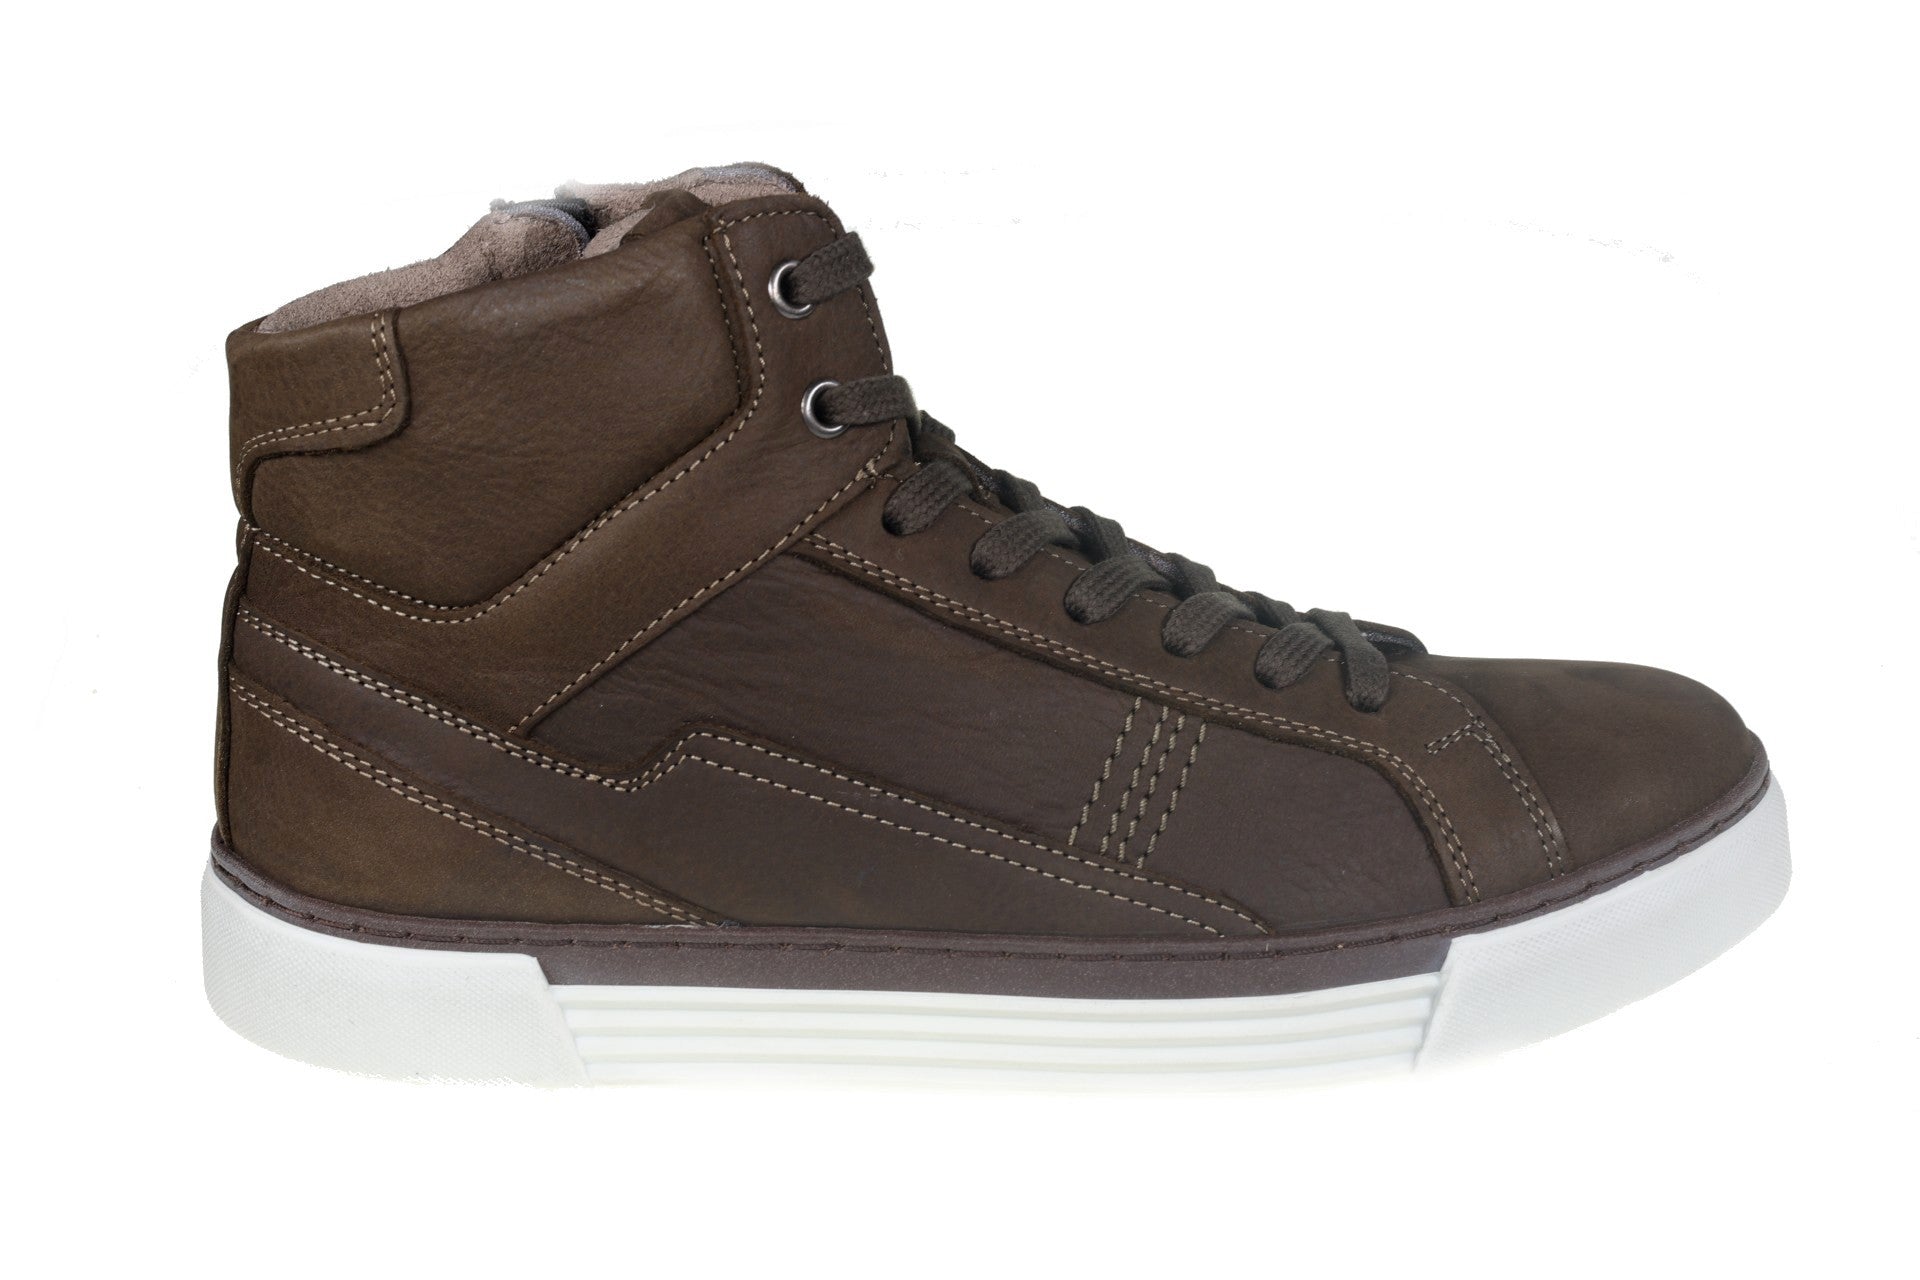 '0460.14.08' men's sneaker boot - Pius by Gabor - Chaplinshoes'0460.14.08' men's sneaker boot - Pius by GaborPius Gabor